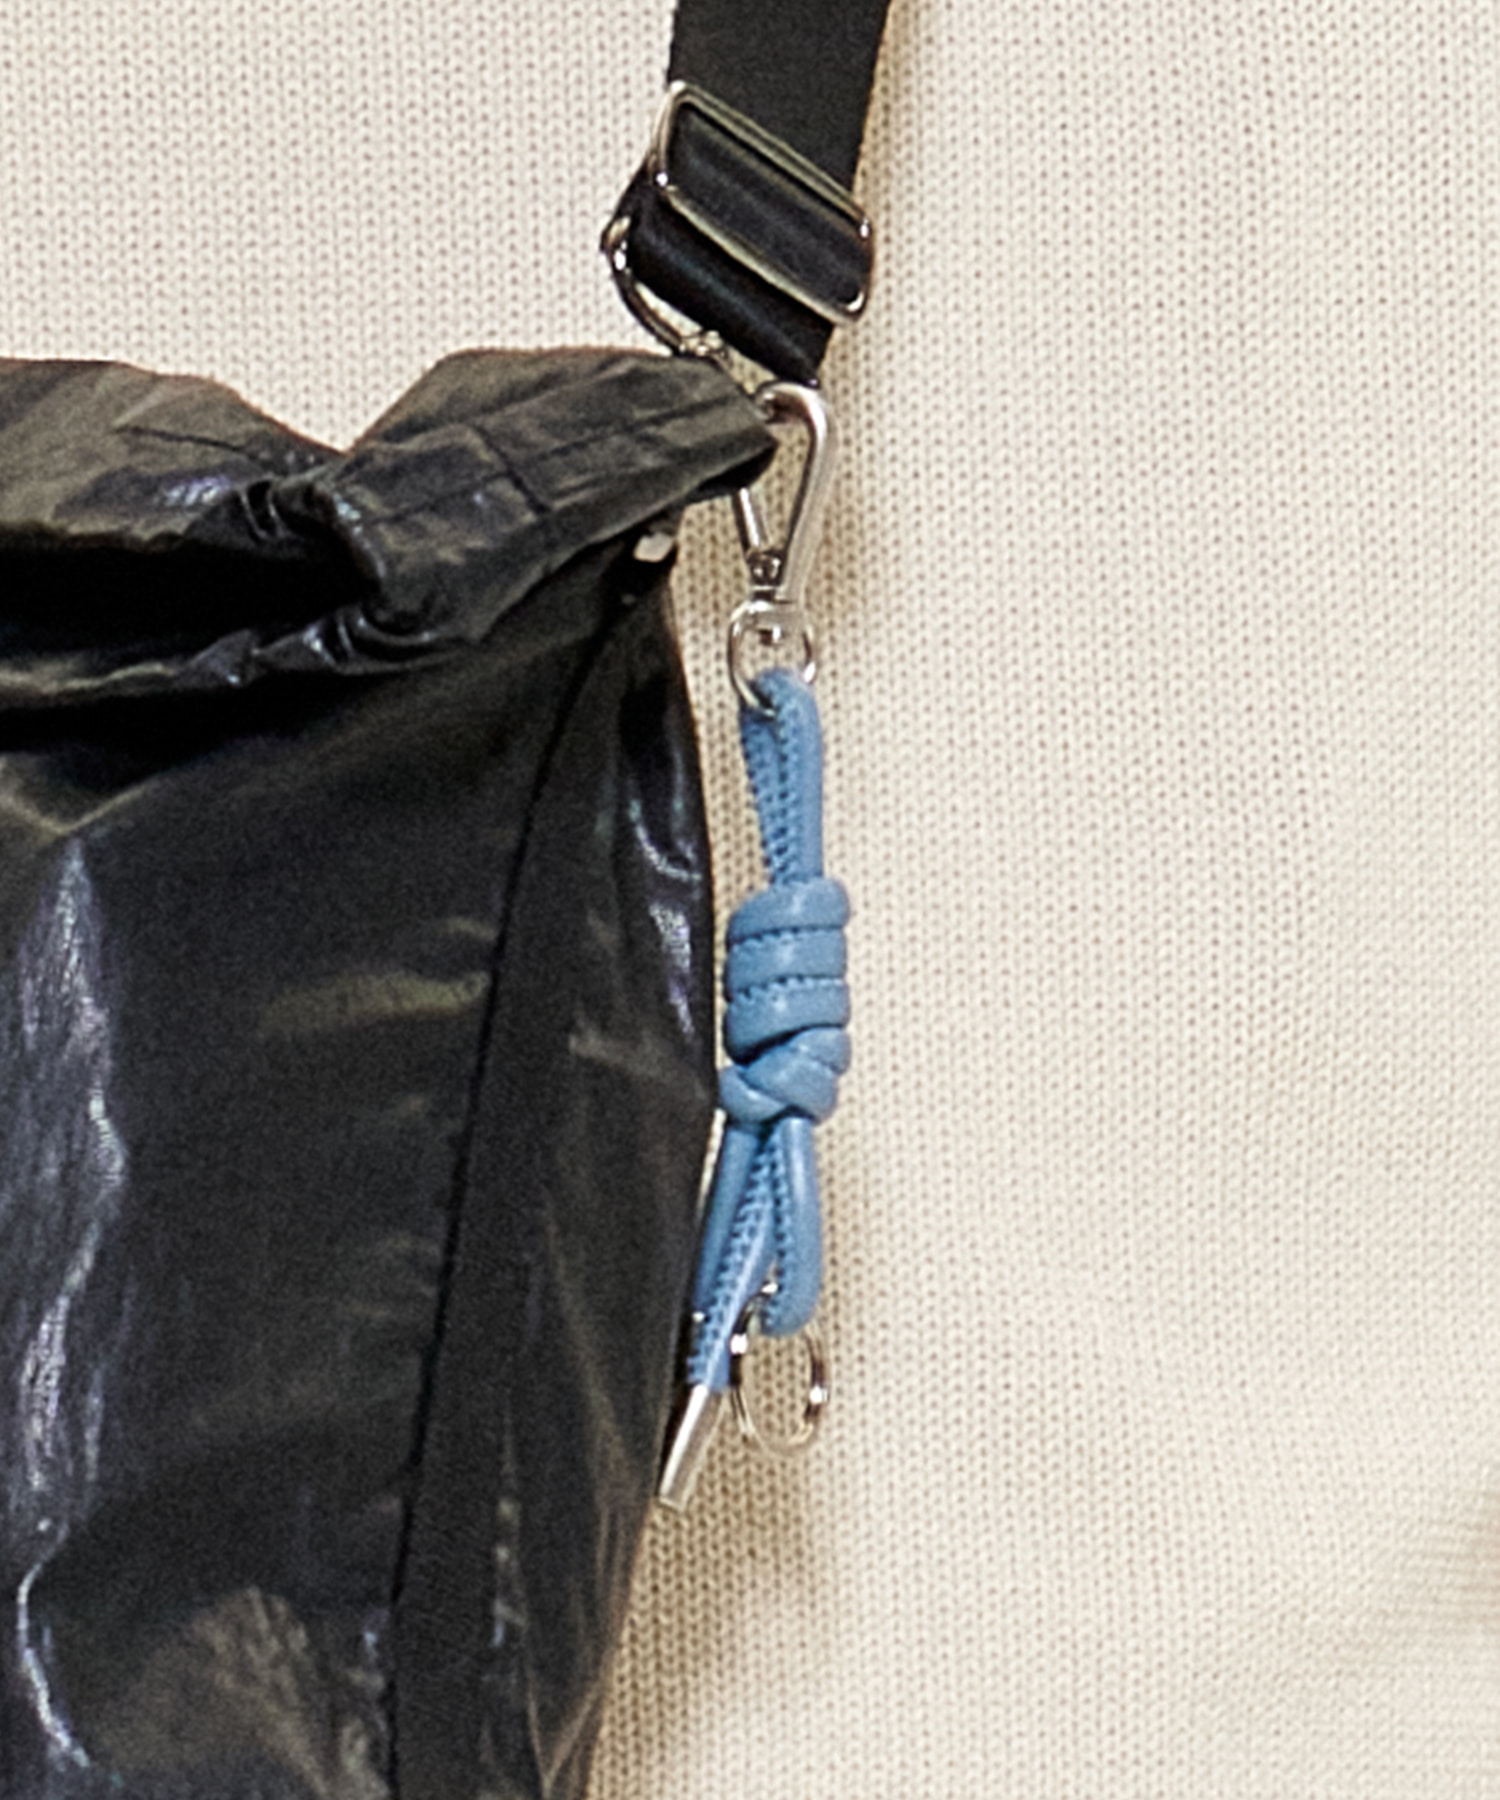 Knotted leather keyring BLUE